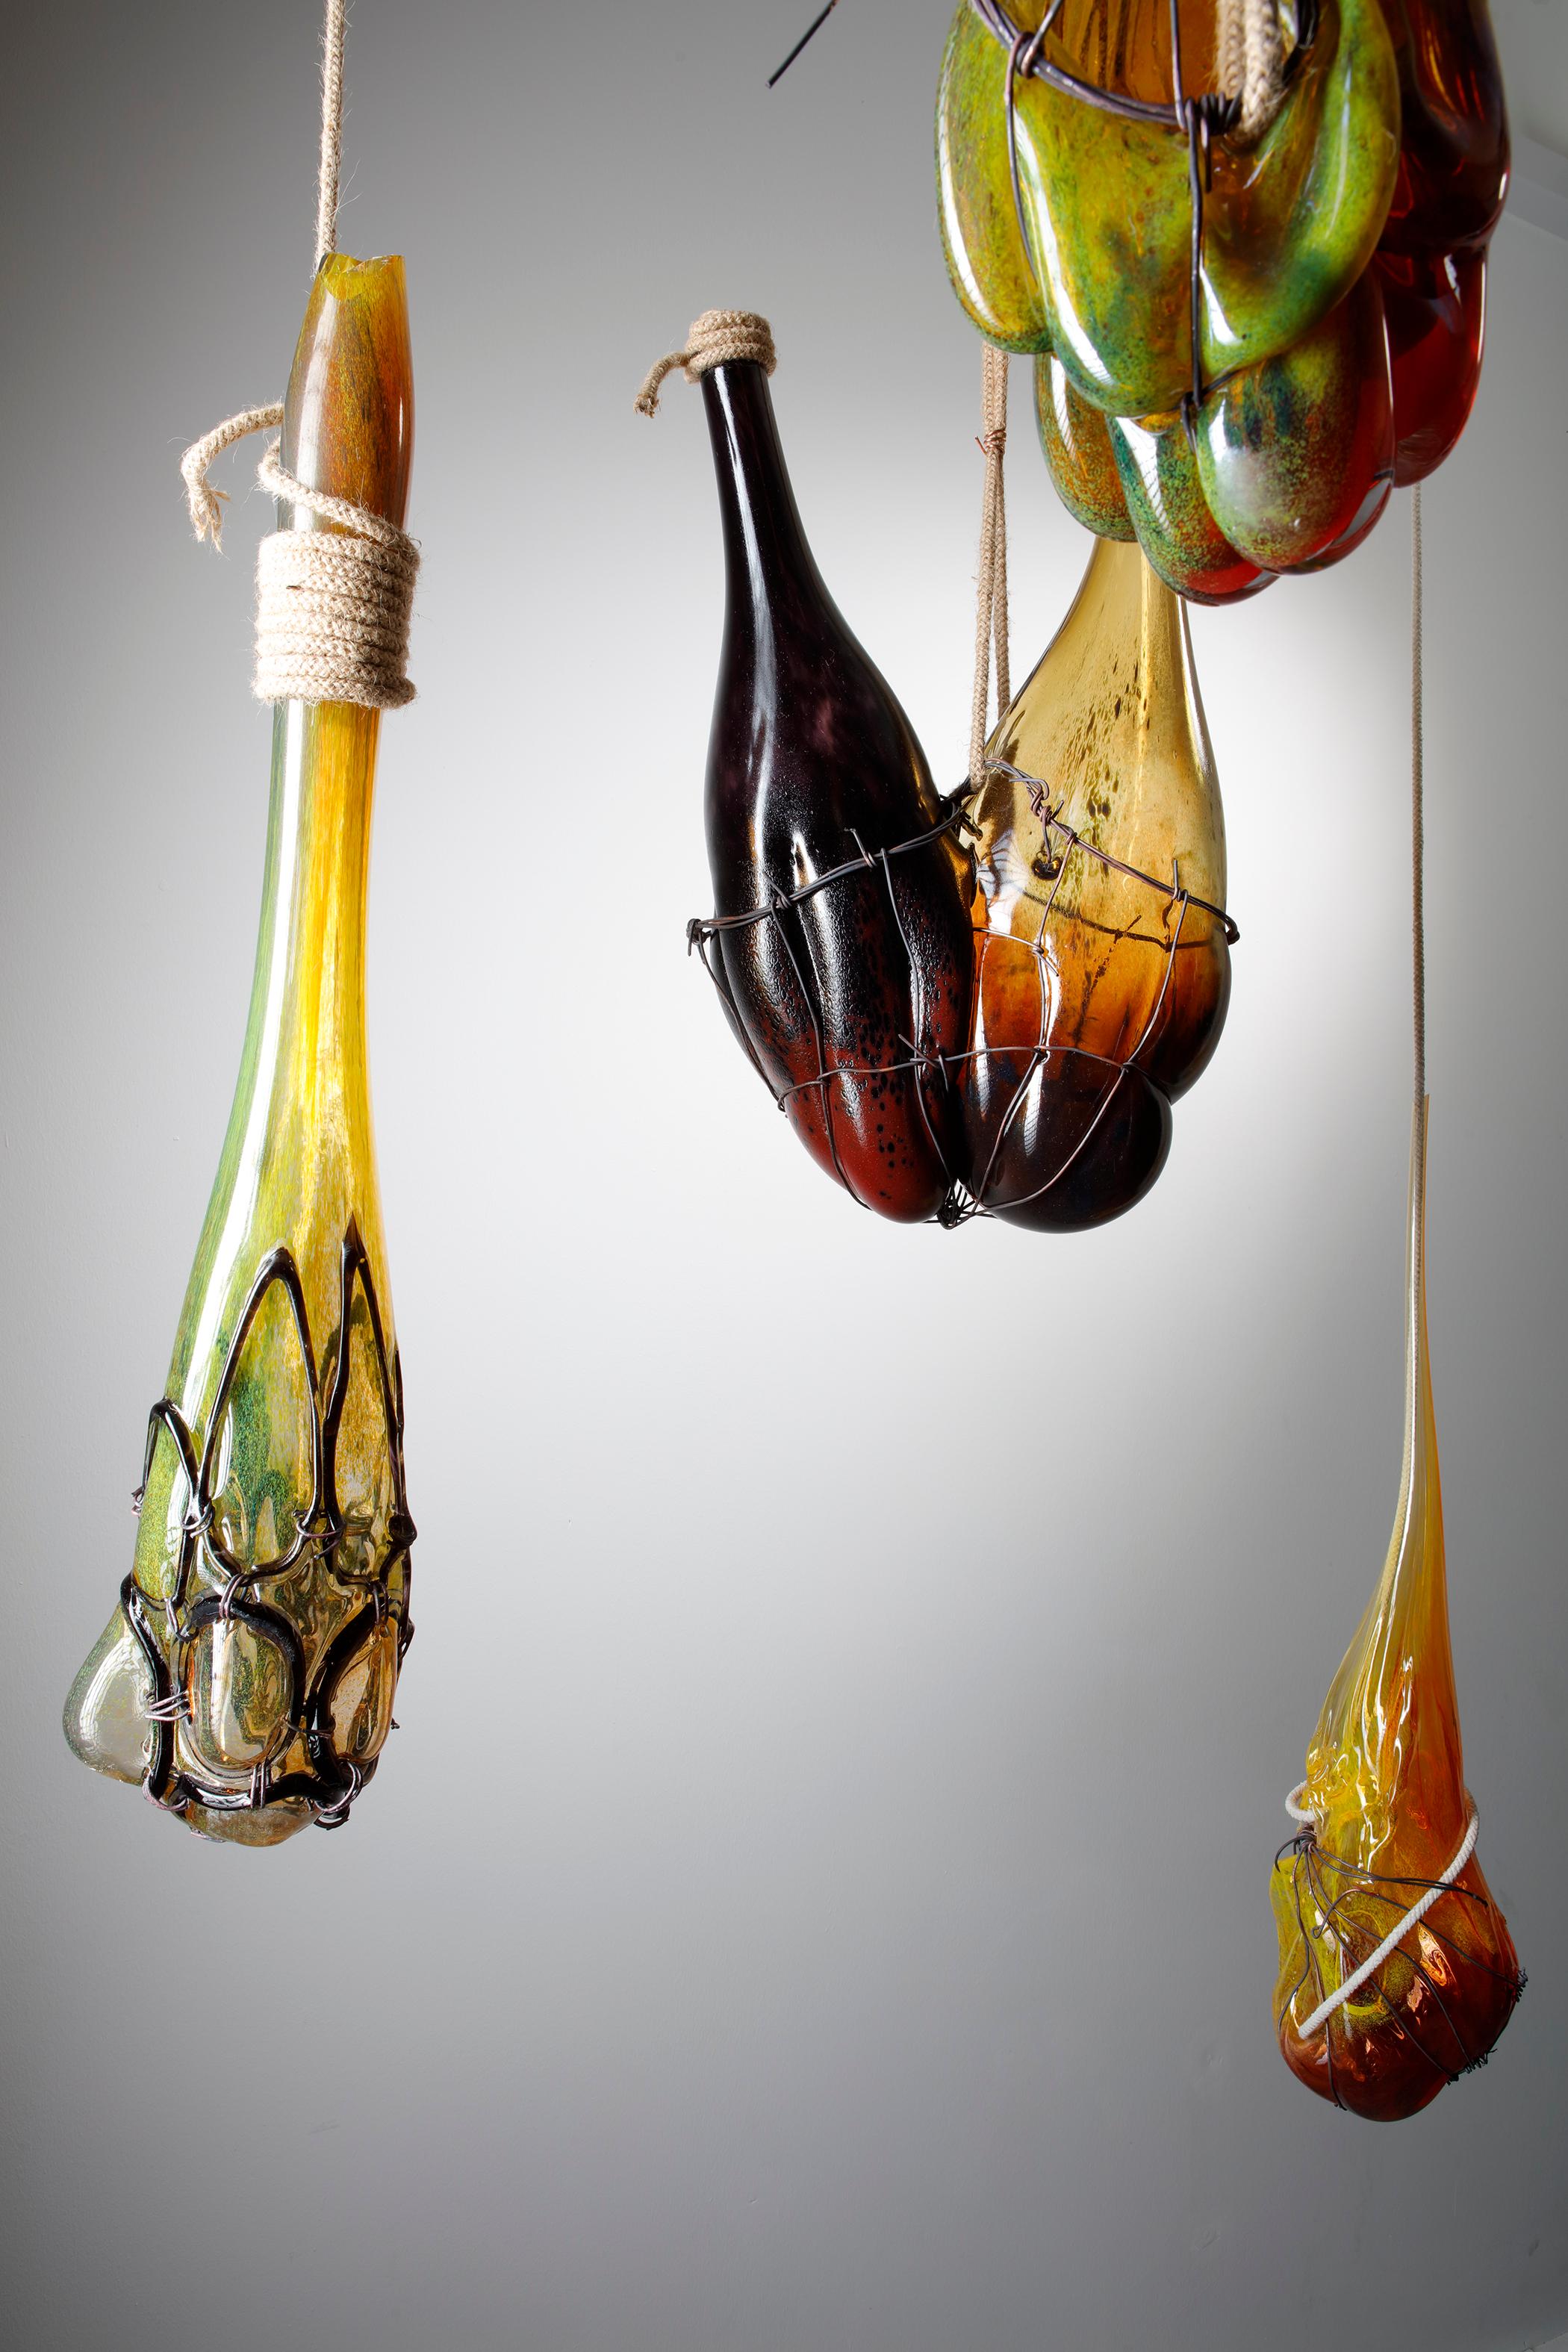 Contemporary Strange Fruit Installation, a Unique Glass Hanging Sculpture by Chris Day